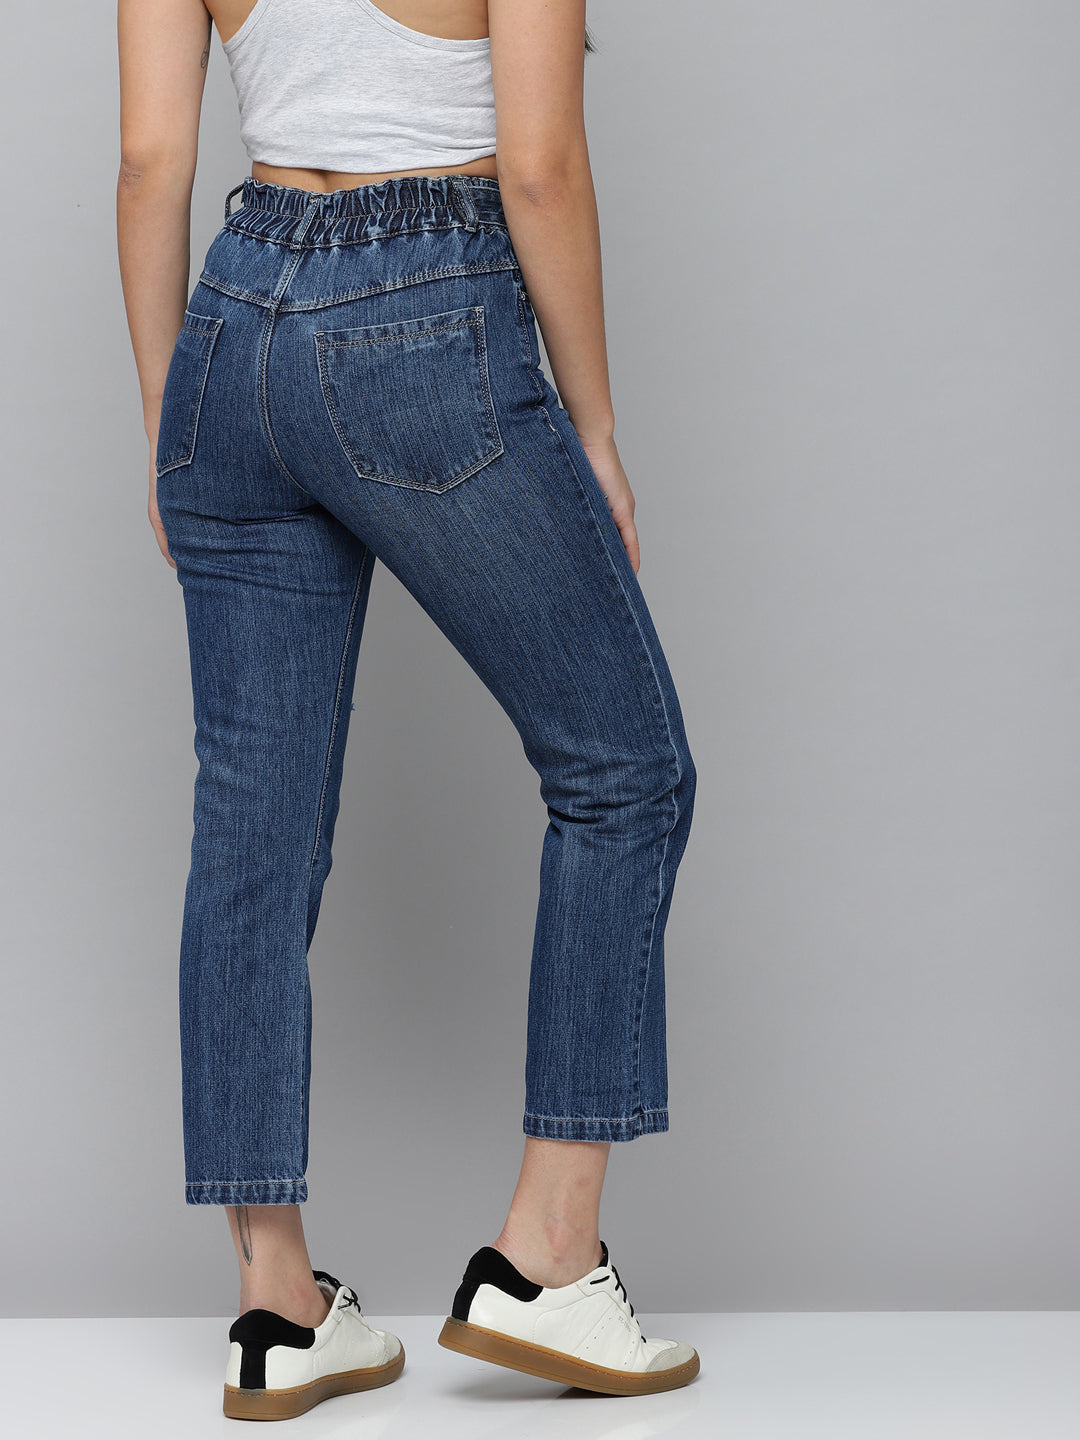 Women's Navy Blue Solid Relaxed Fit Denim Jeans